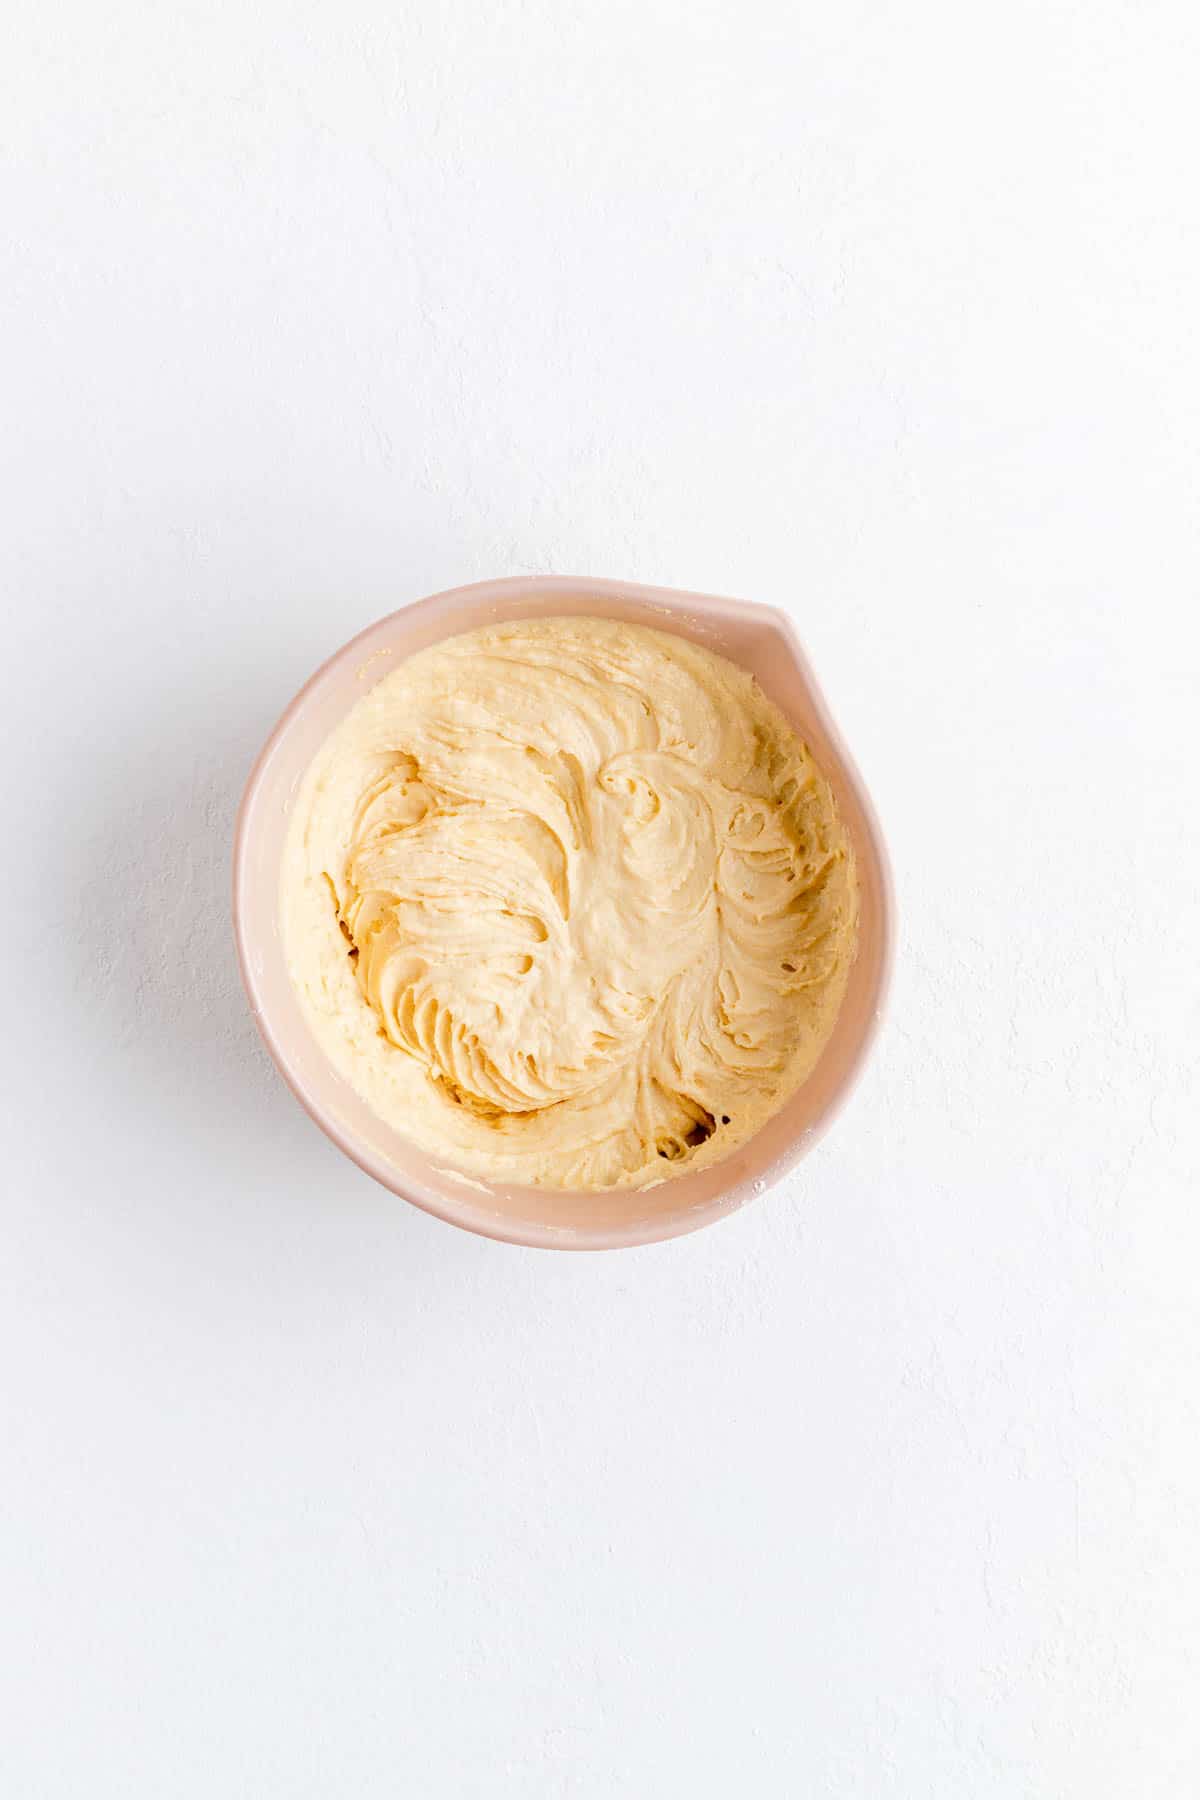 prosecco cupcake batter just mixed in a tan bowl on white background.